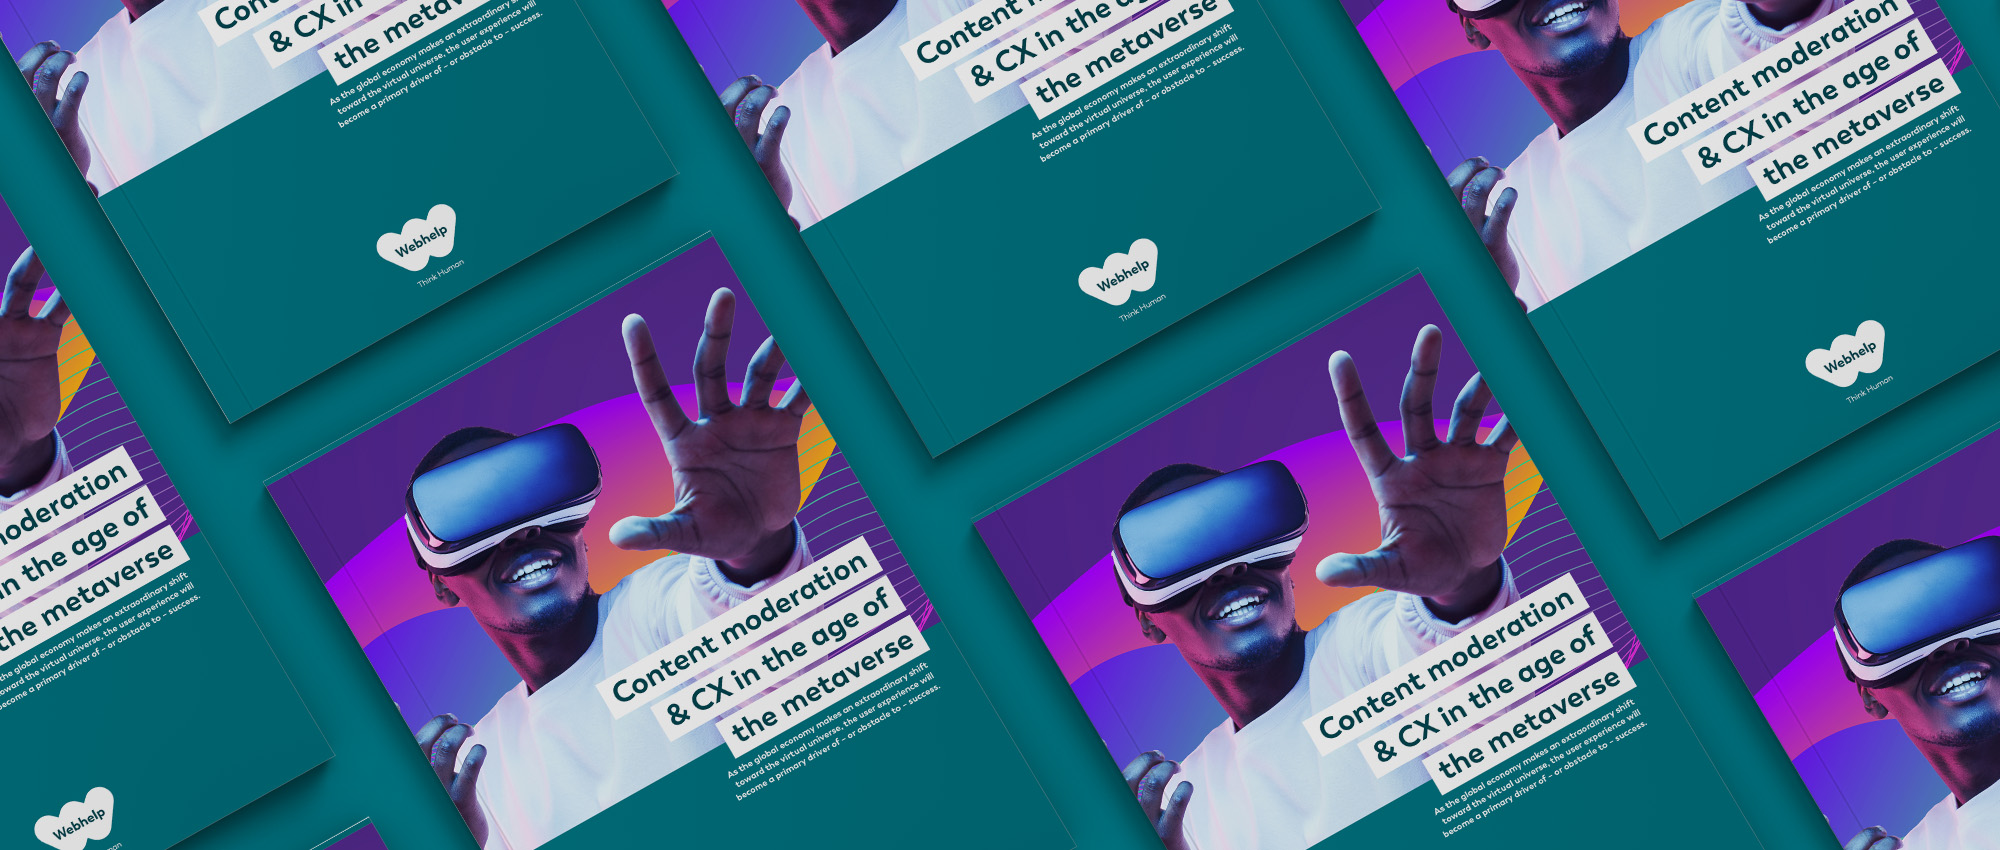 eBook: Content moderation & CX in the age of the metaverse